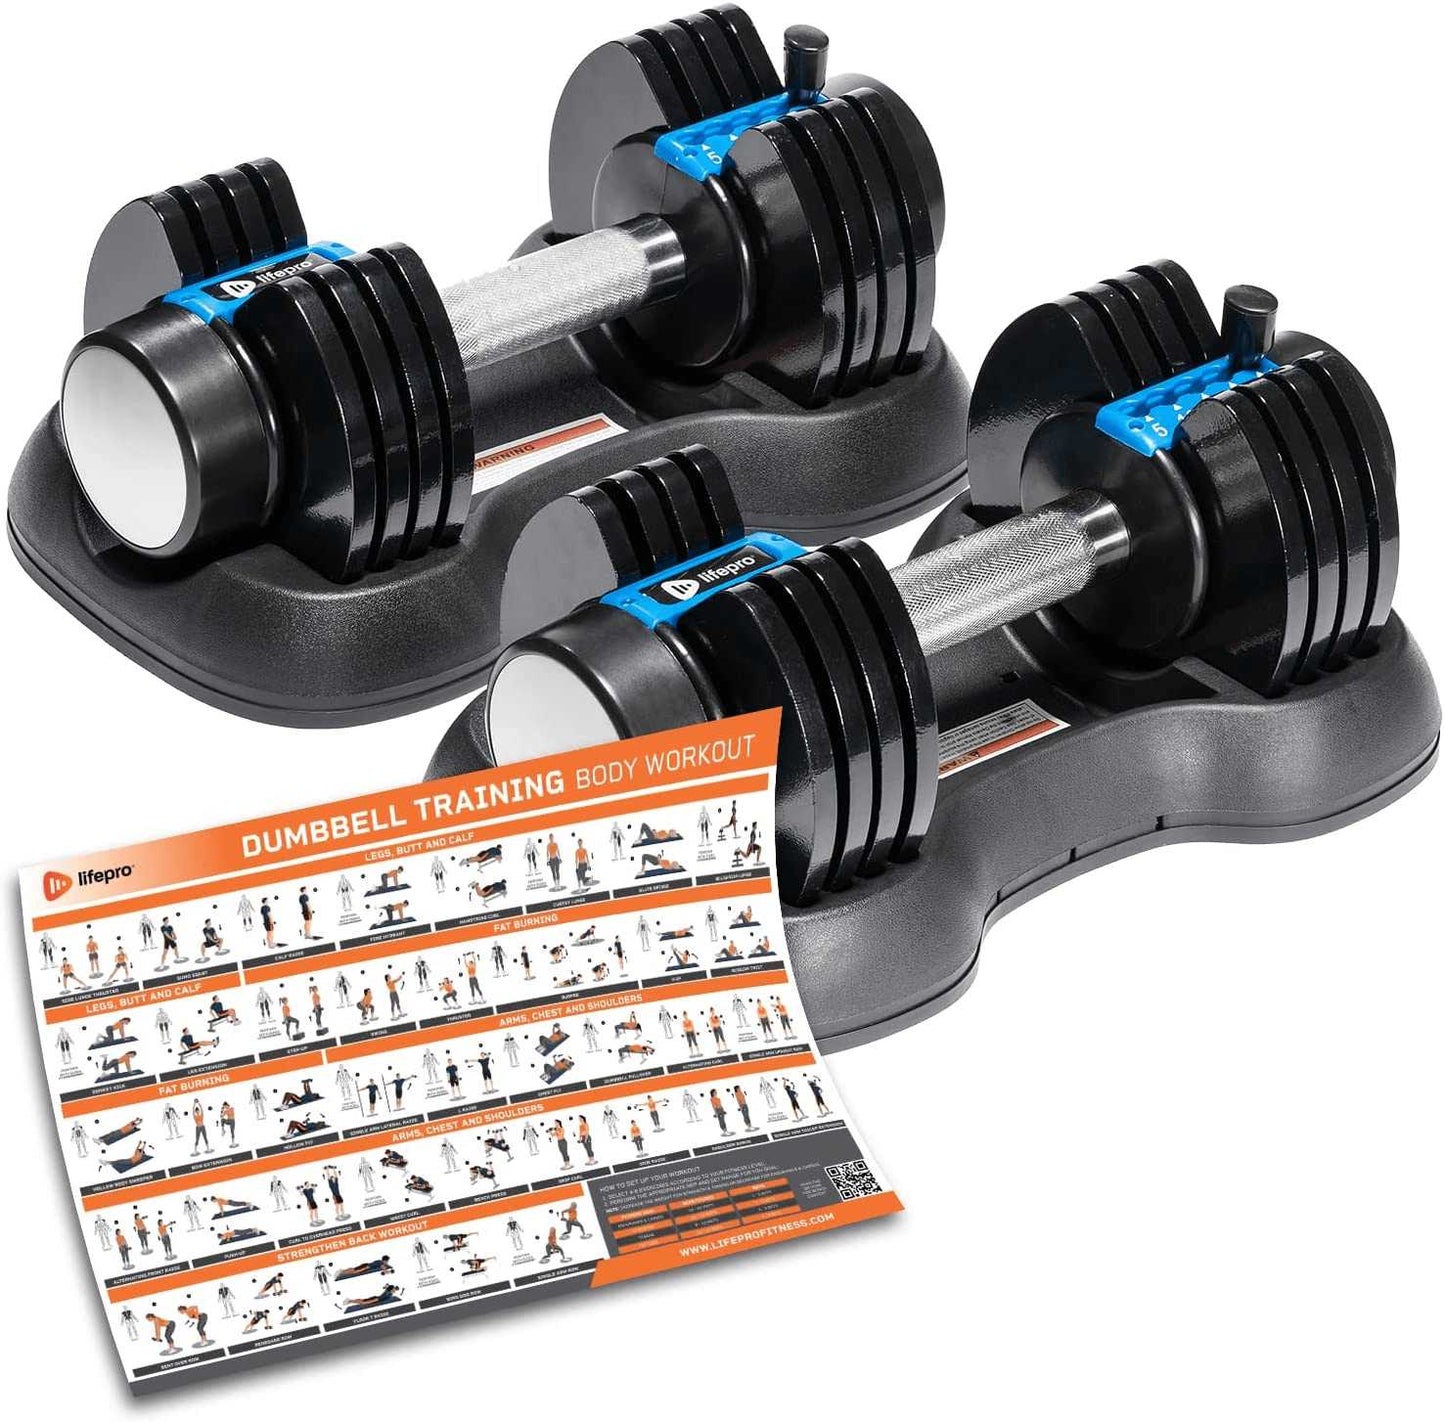 Dumbbell Workout Guide – Lifepro